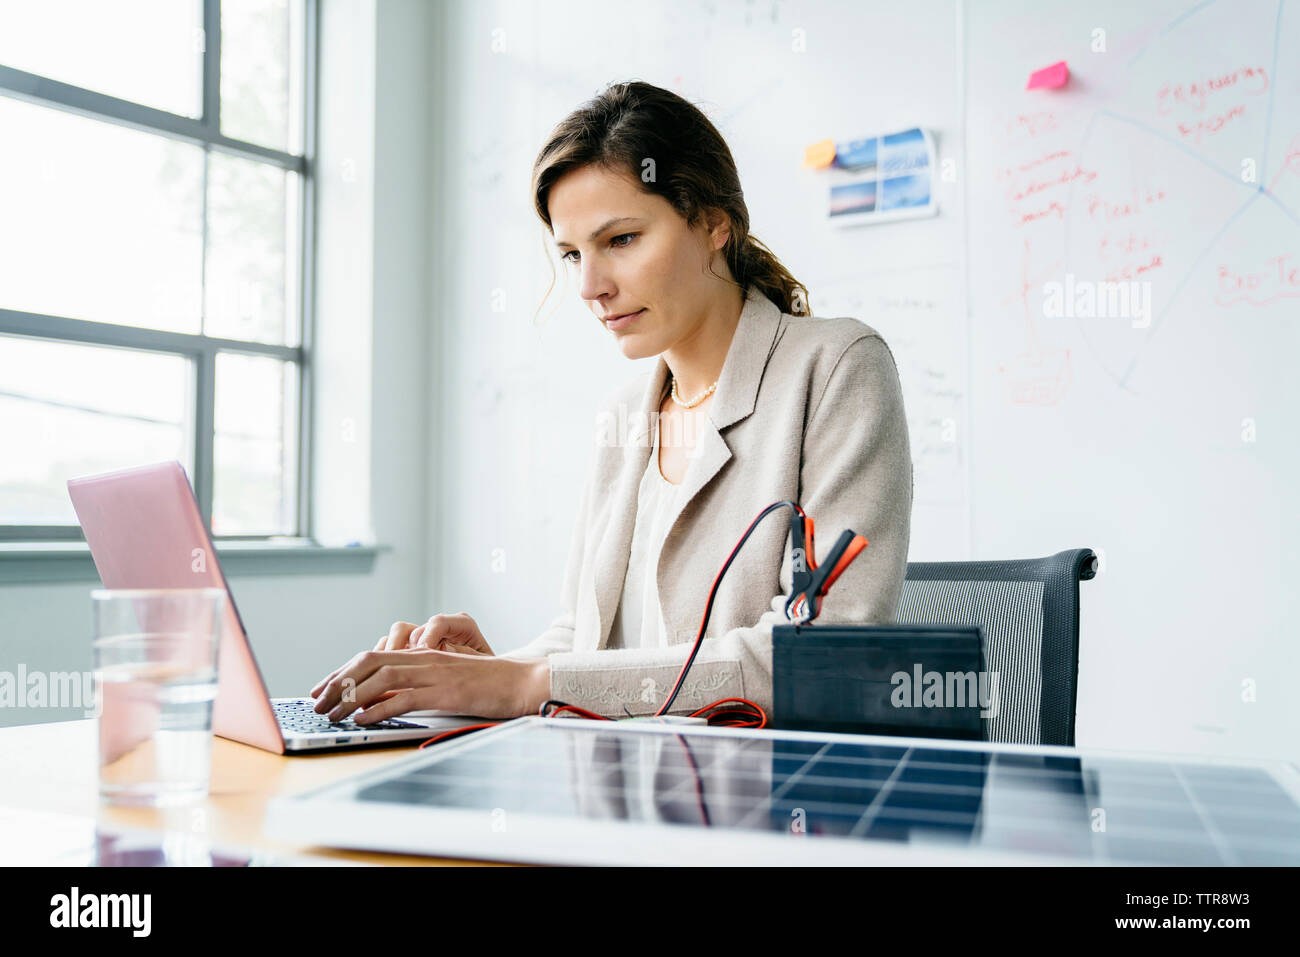 businesswoman using laptop computer while sitting against whiteboard in office Stock Photo